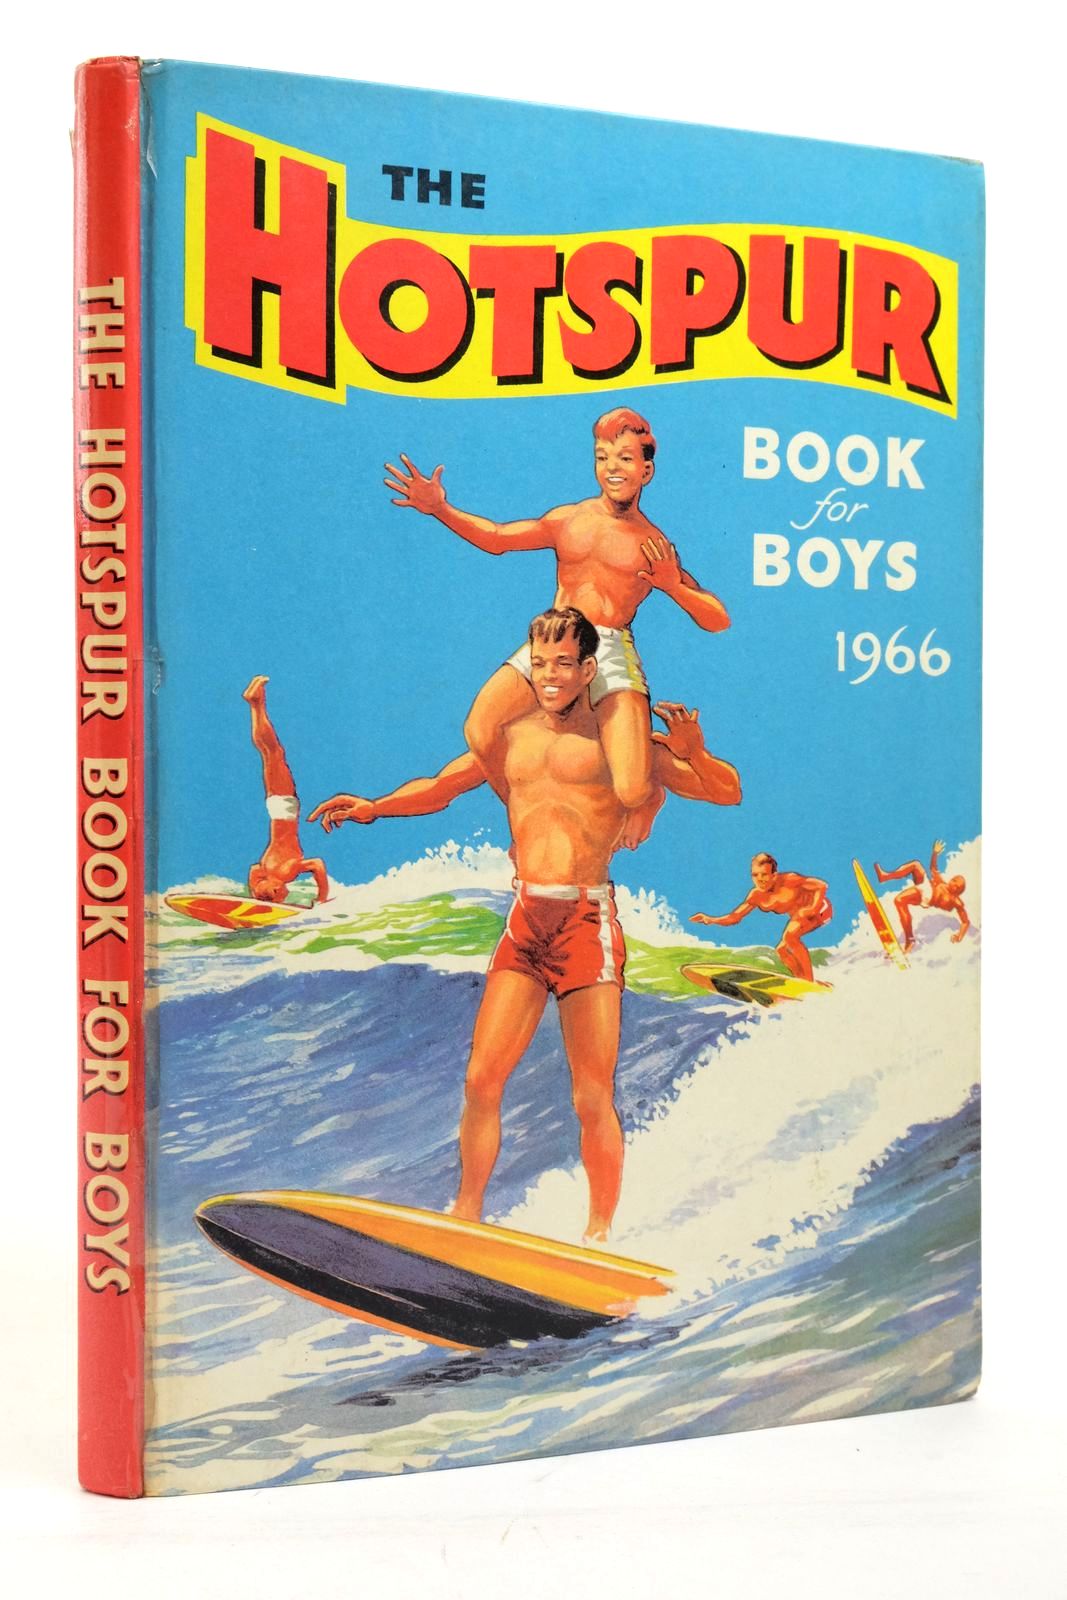 Photo of THE HOTSPUR BOOK FOR BOYS 1966 published by D.C. Thomson & Co Ltd. (STOCK CODE: 2137952)  for sale by Stella & Rose's Books